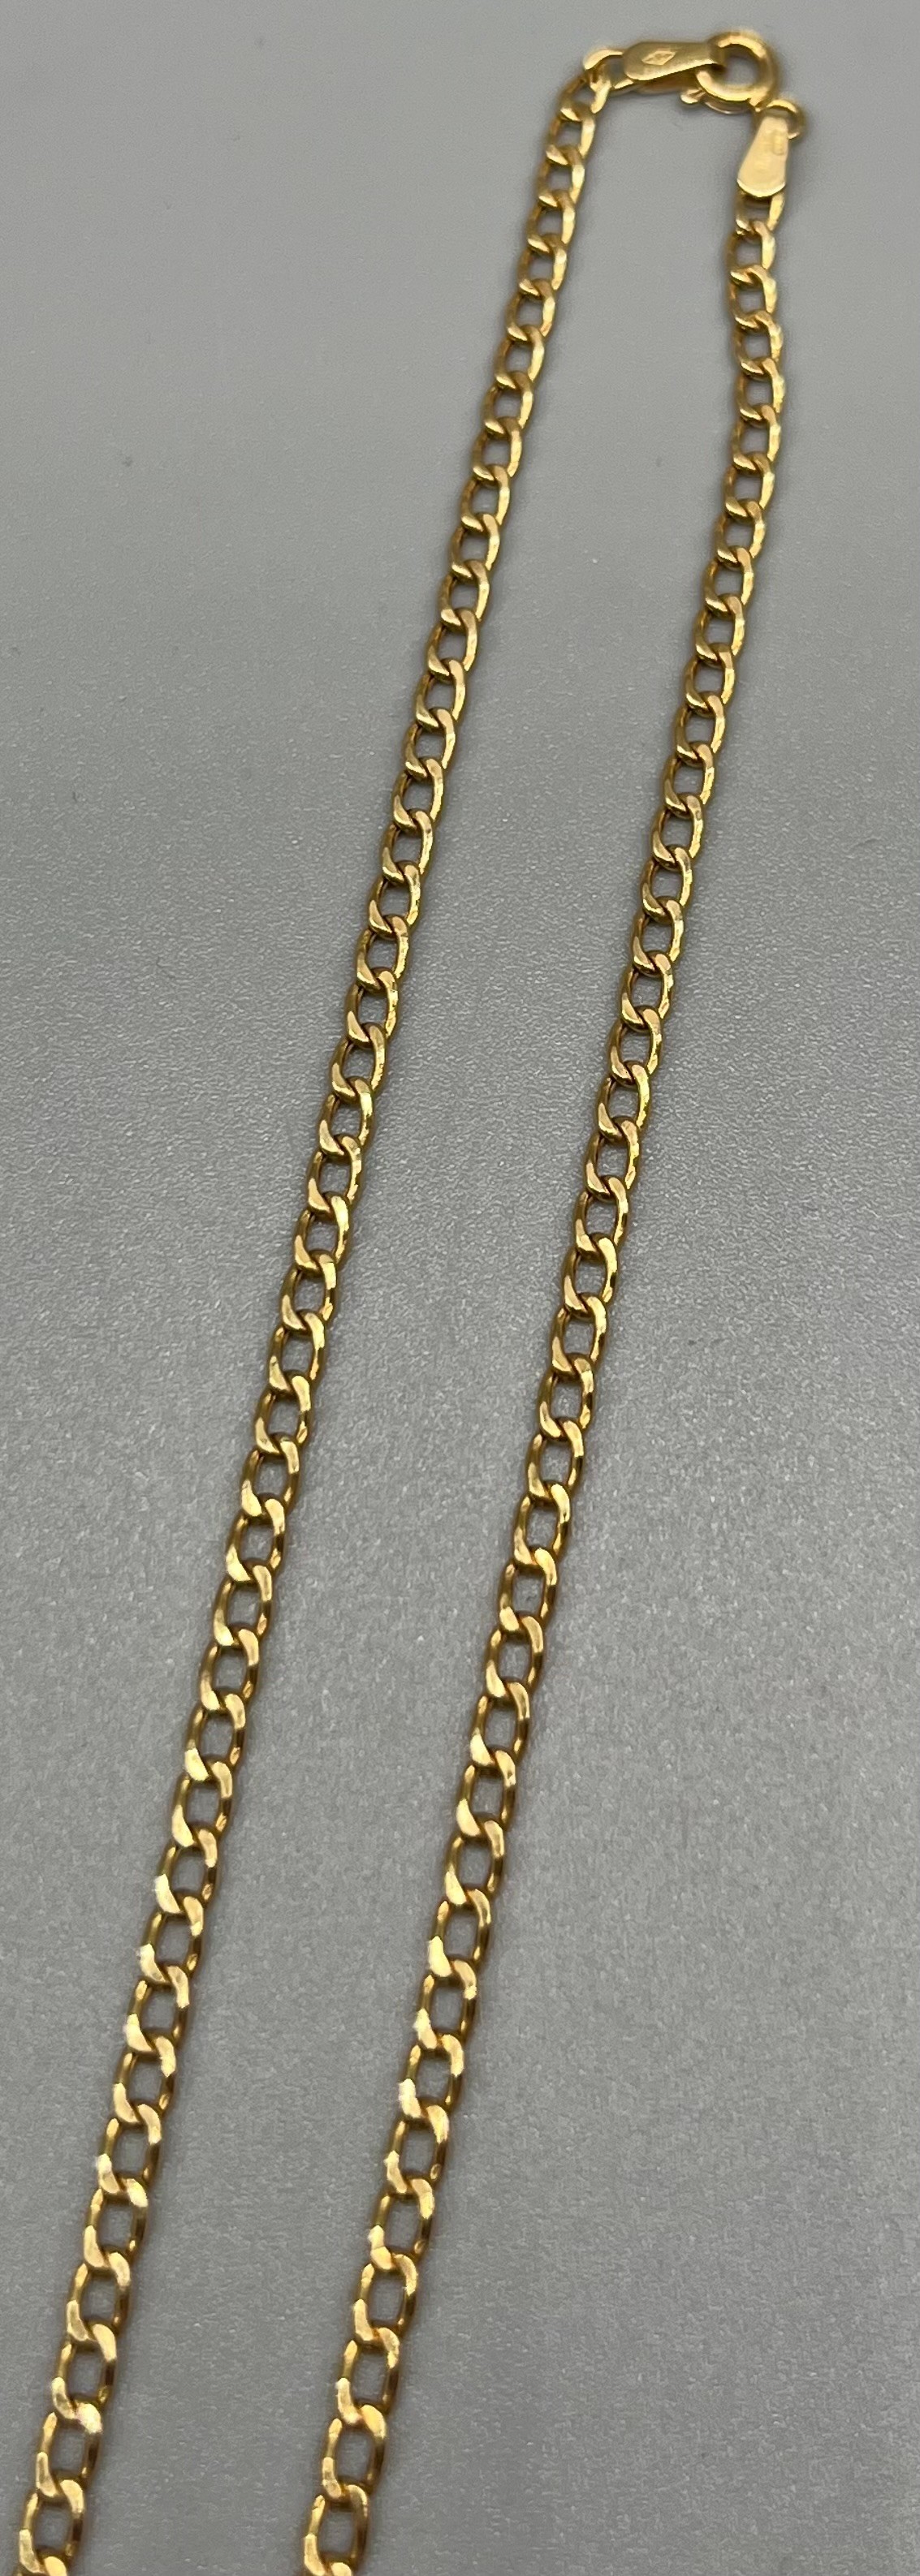 9ct yellow gold curb necklace. [2.91 grams] [27cm drop] - Image 3 of 3